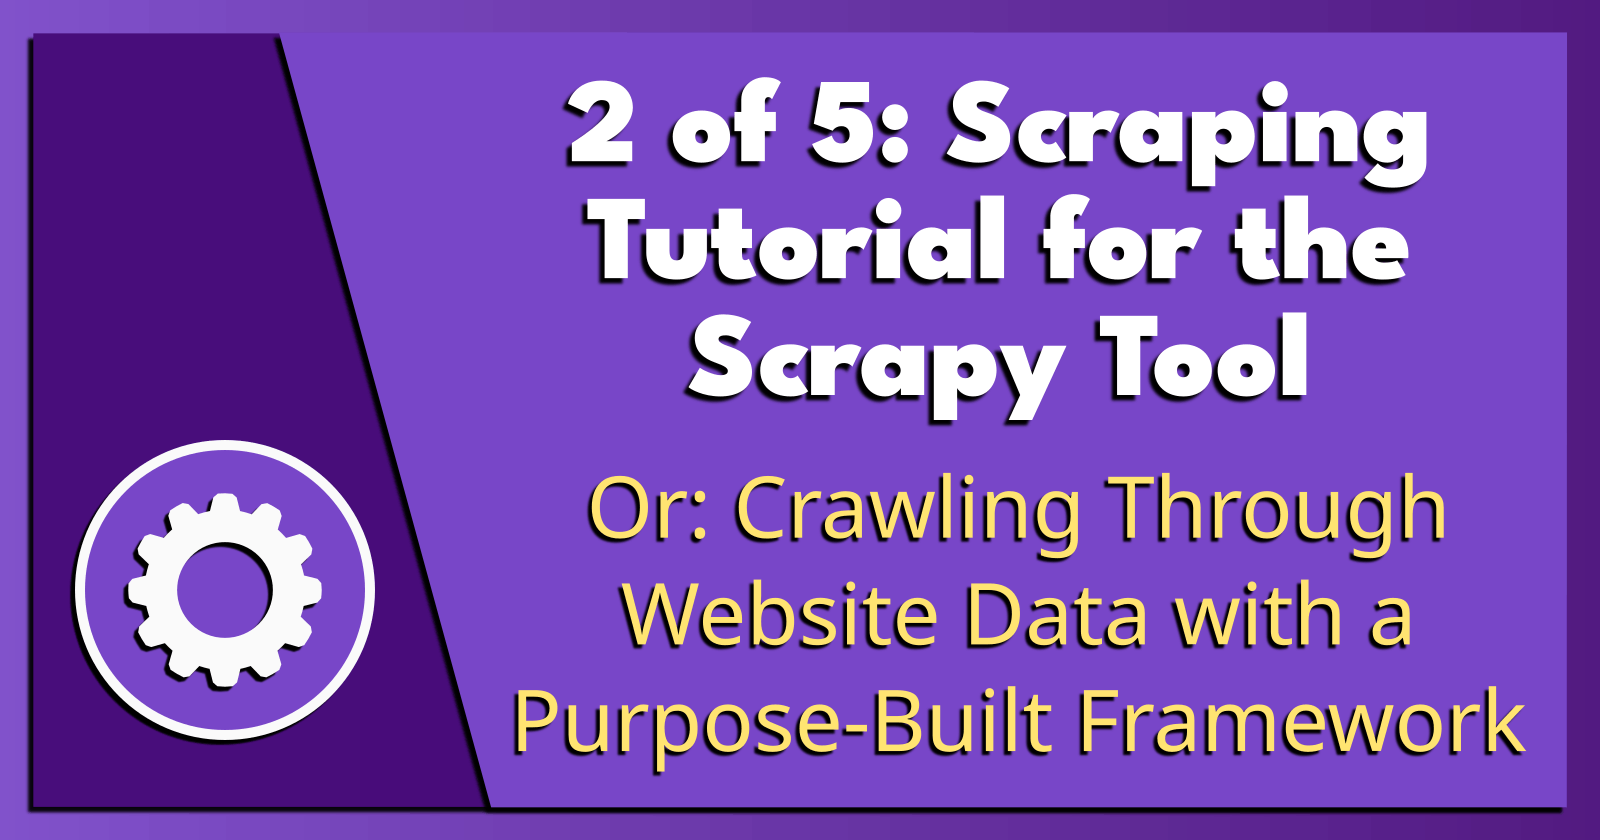 2 of 5: Scraping Tutorial for the Scrapy Tool.